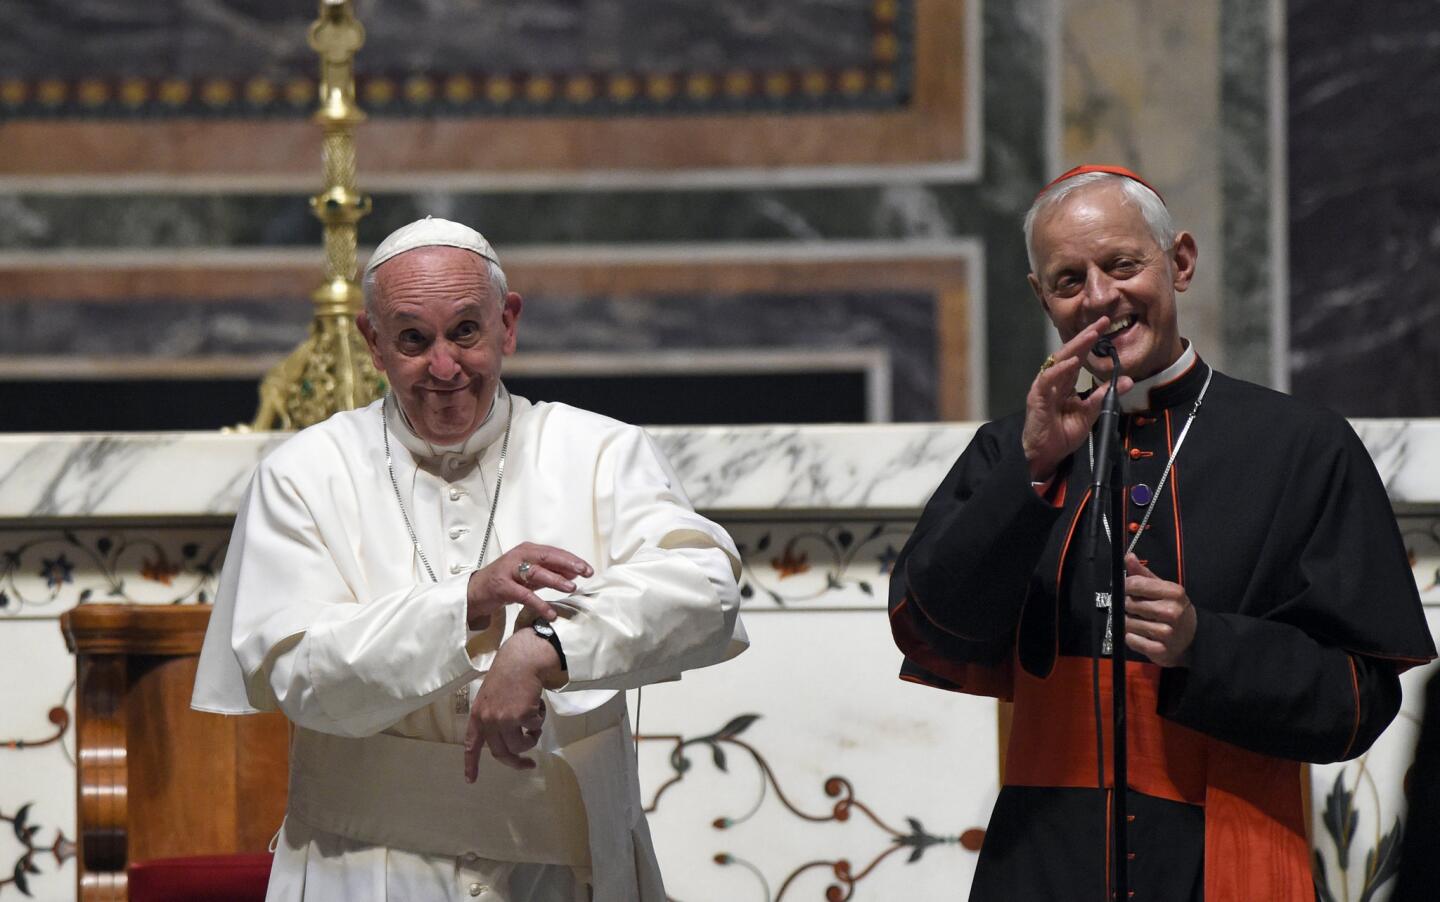 Cardinal Donald Wuerl, archbishop of Washington, right, translates for Pope Francis as the pontiff laments that he won't have time to greet everyone after a midday prayer with U.S. bishops on Sept. 23, 2015, at St. Matthew's Cathedral in Washington.